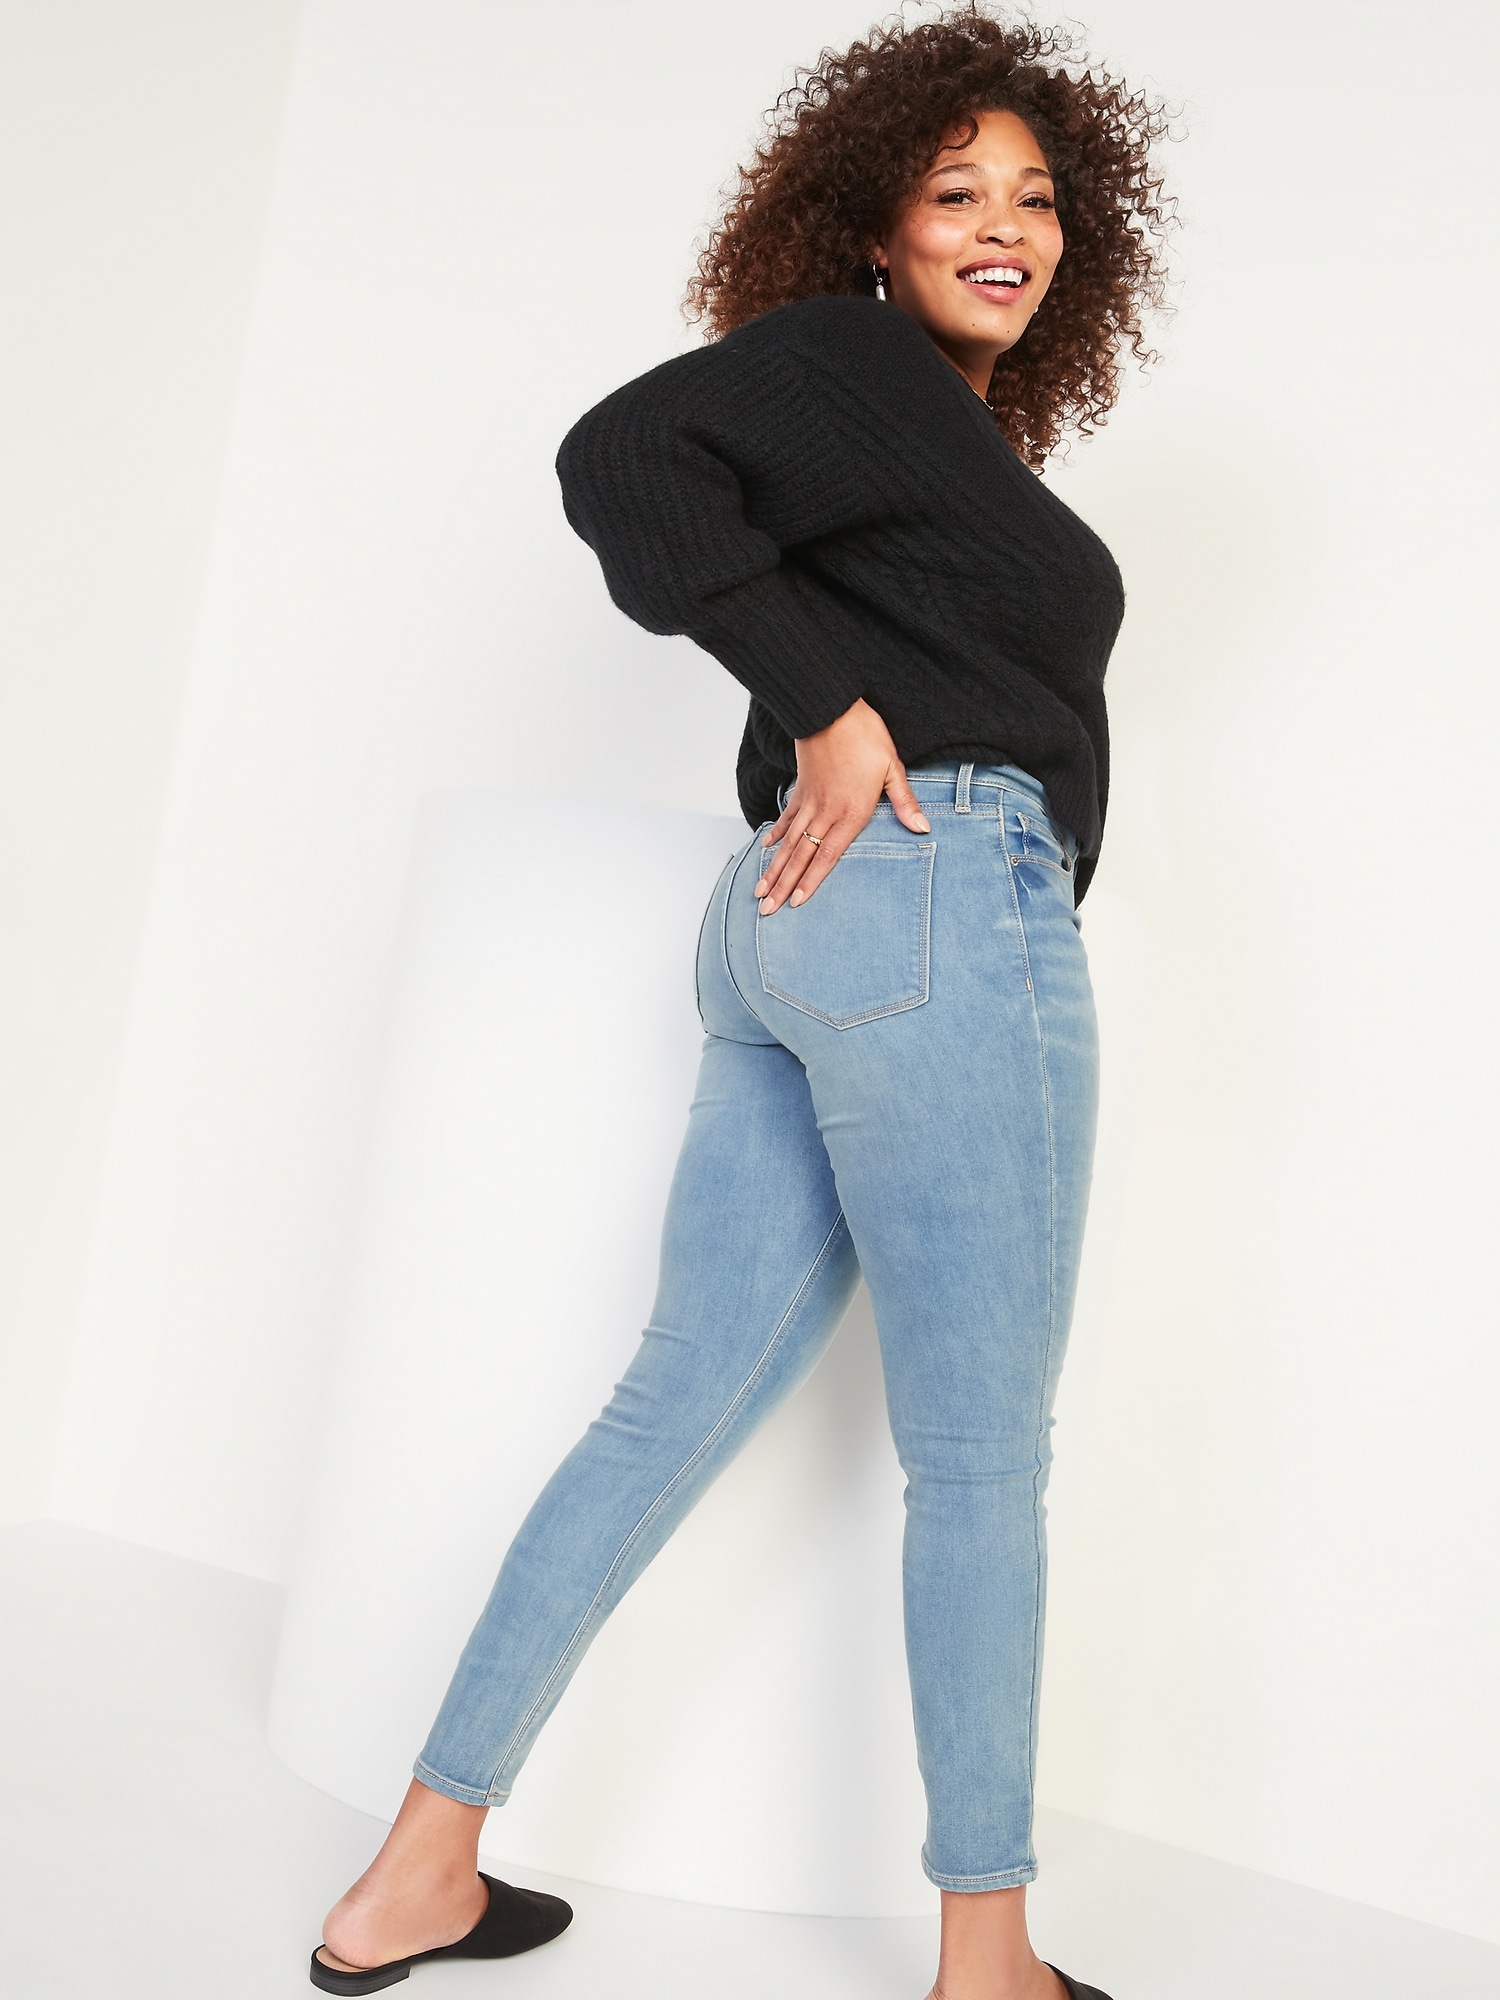 High-Waisted Rockstar Built-In Warm Super Skinny Jeans for Women | Old Navy